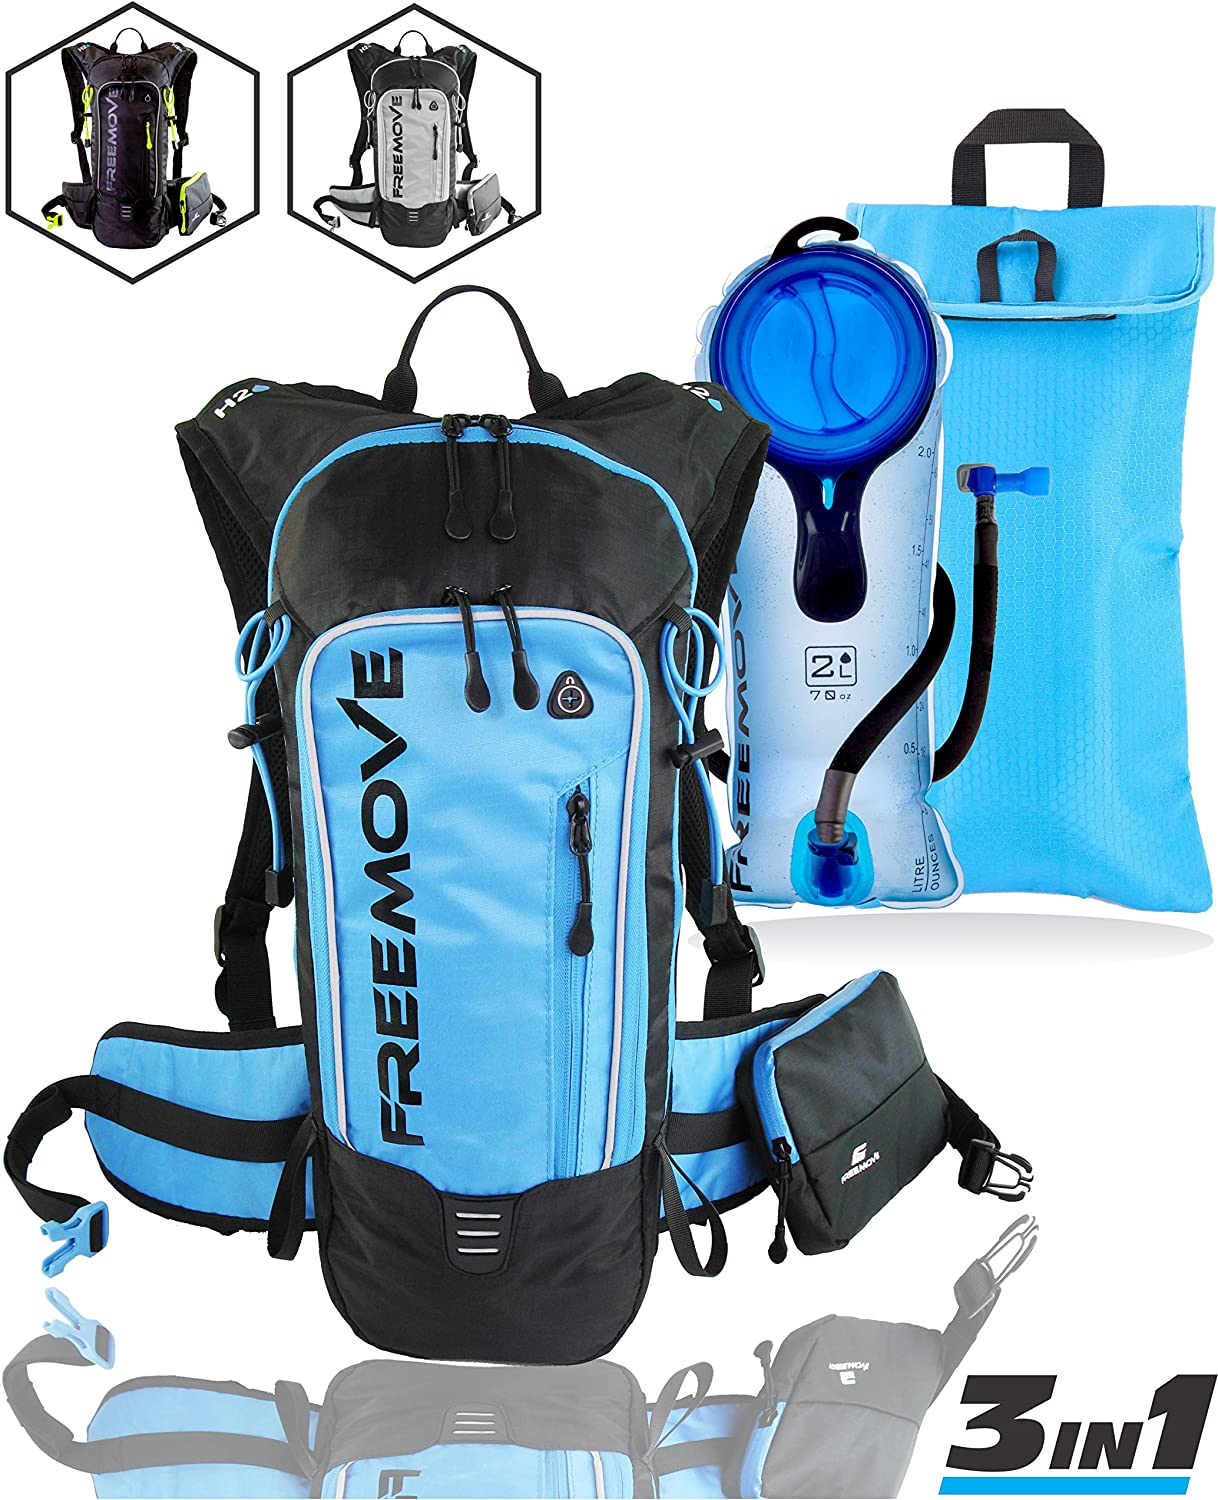 RuRu monkey 12L Hydration Pack Hydration Backpack with 2L Free Water Bladder 